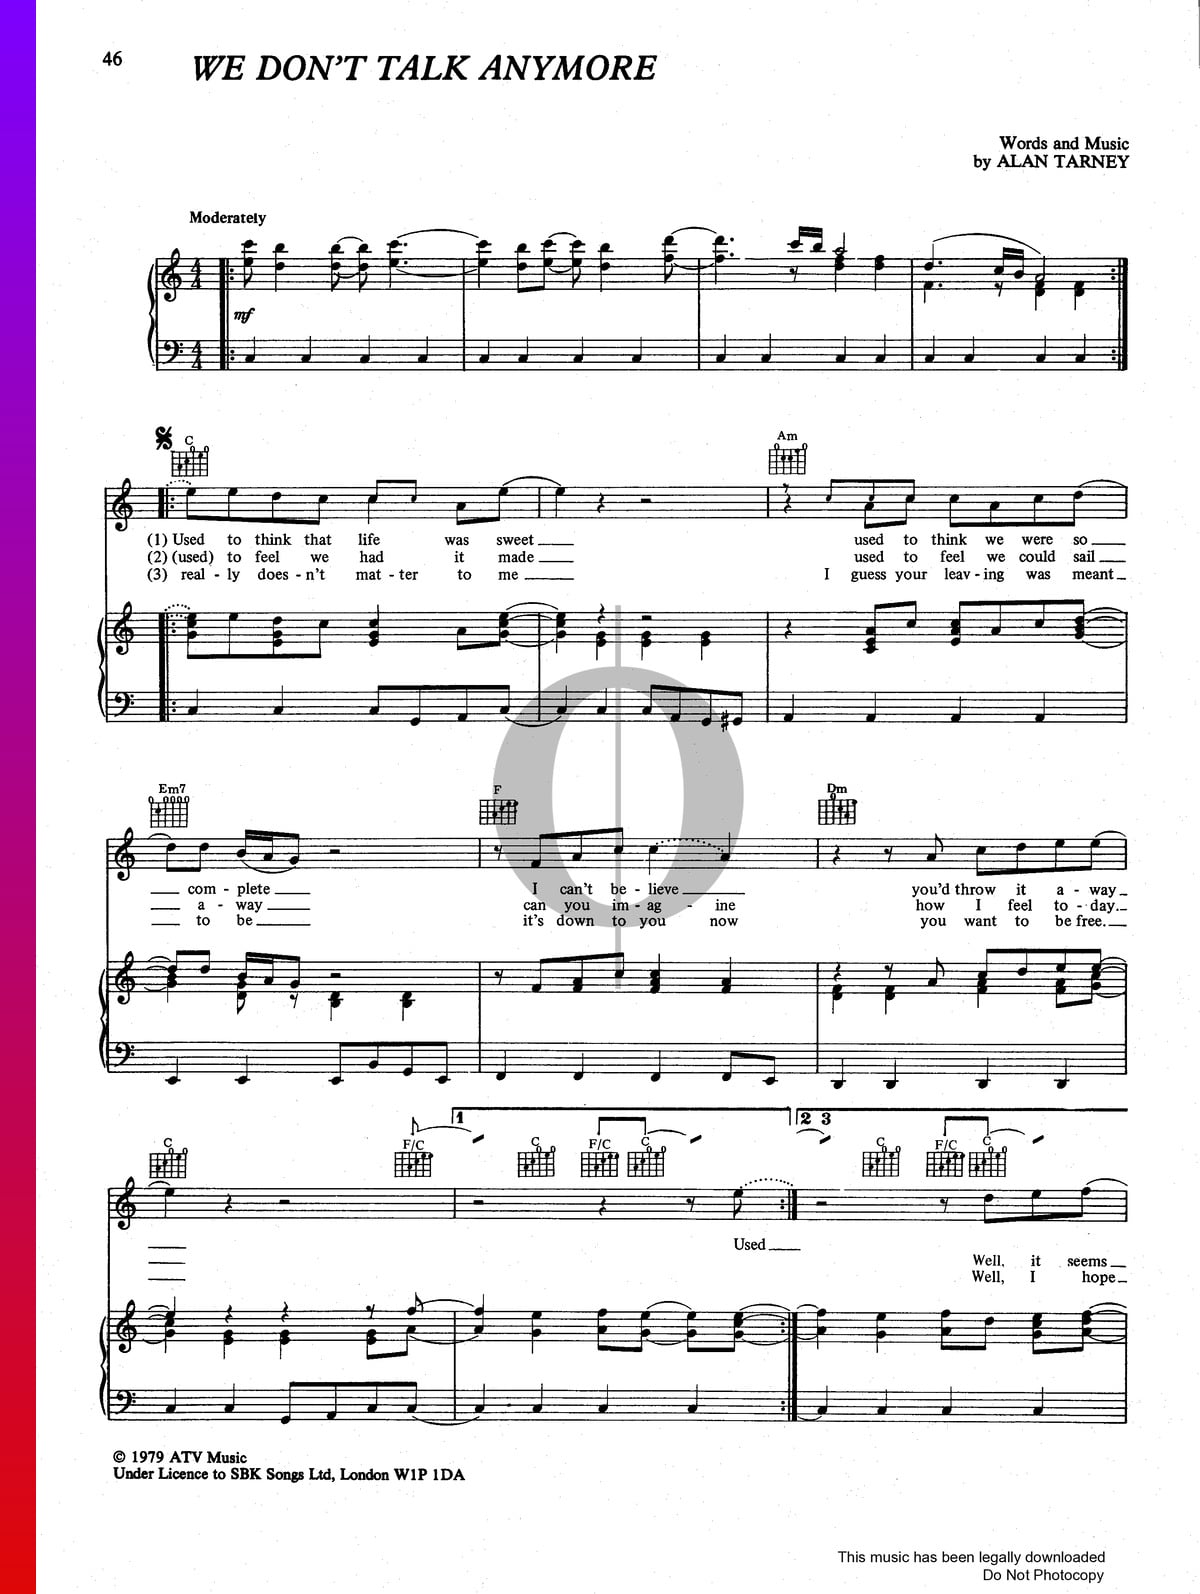 down by marian hill piano sheet music frre